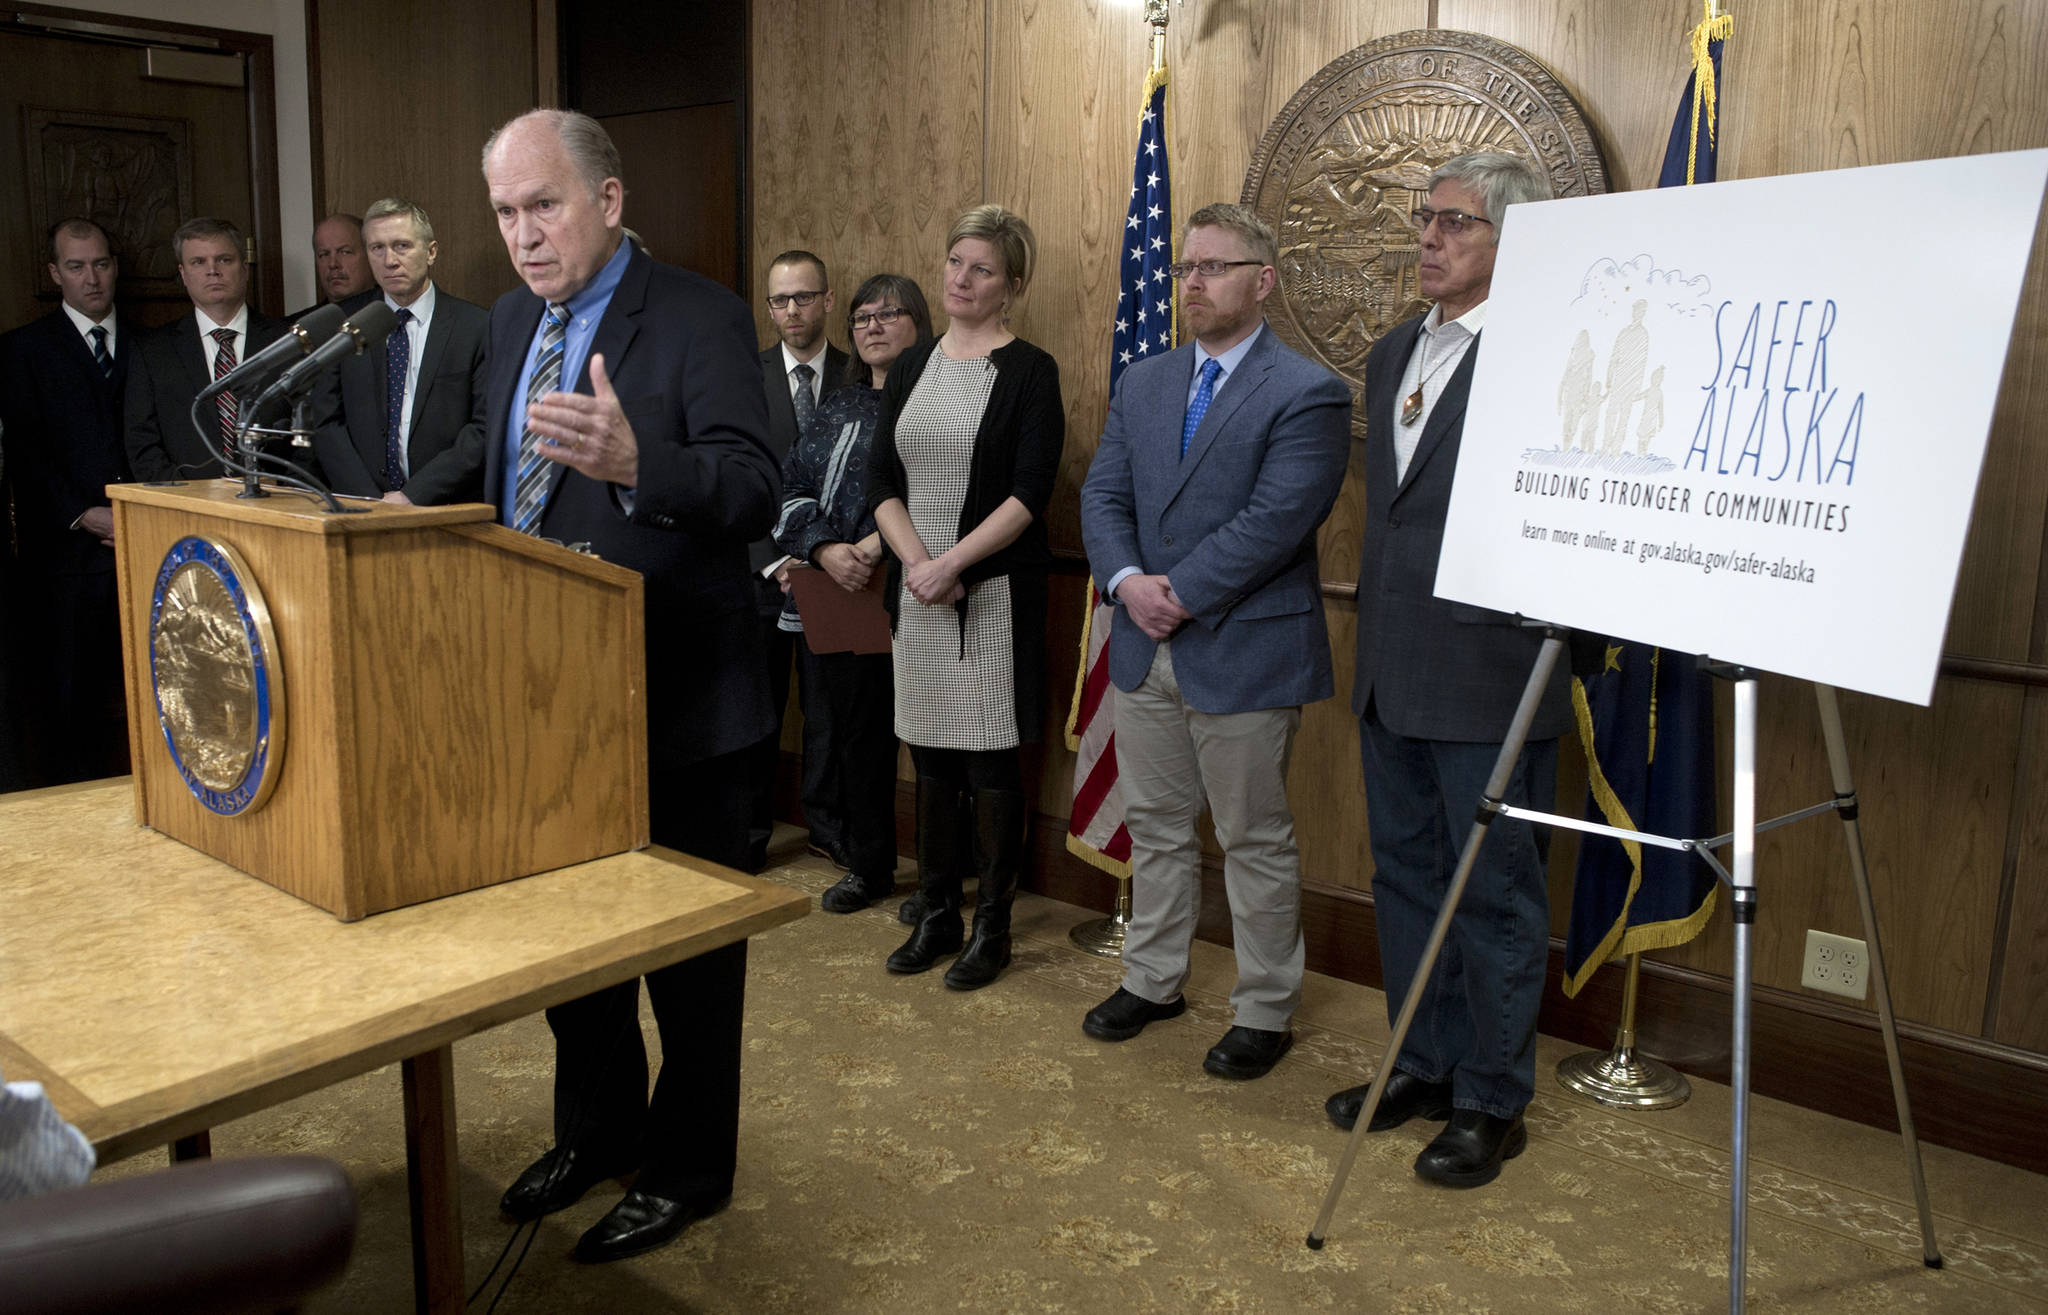 Surrounded by his Cabinet and staff members, Gov. Bill Walker speaks at a Capitol press conference on Monday about legislation he is introducing to change the way opioids are prescribed and monitored. (Michael Penn | Juneau Empire)